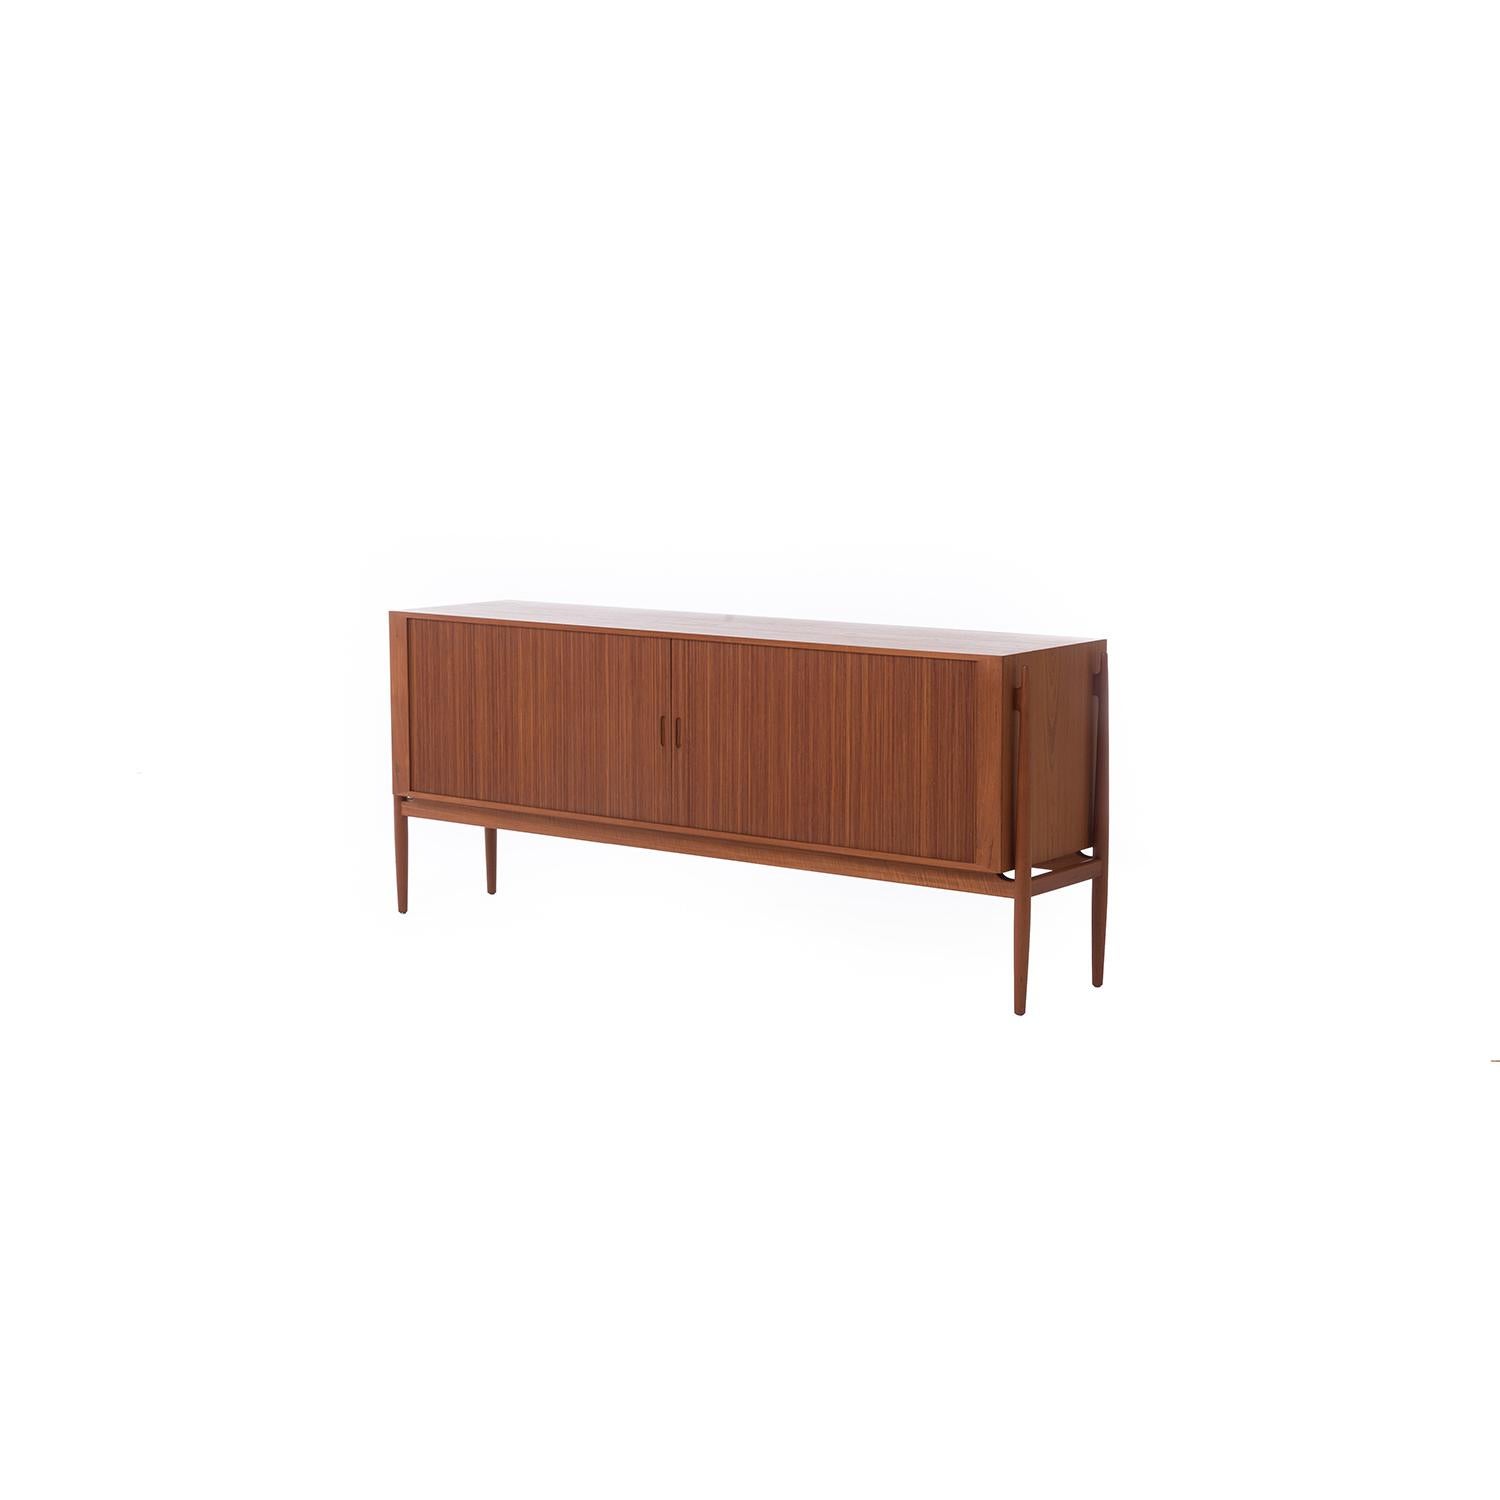 An exquisite example of what a Danish master cabinet maker can design and manufacturer. Known as the NV54 this Niels Vodder designed sideboard is in beautiful original condition. Beautiful book matched veneer case that is finished on all sides in a